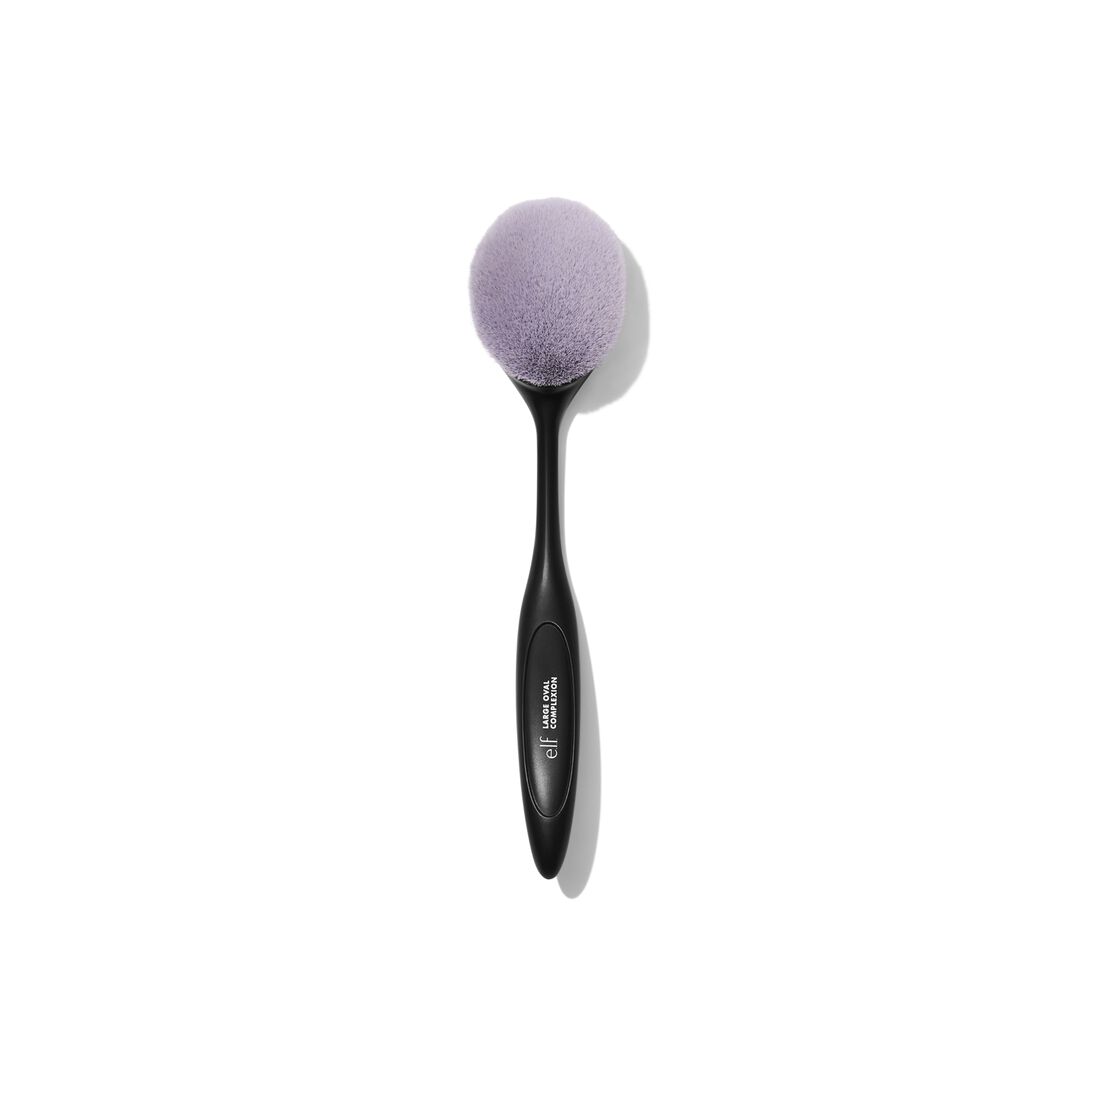 Oval Makeup Brushes, 